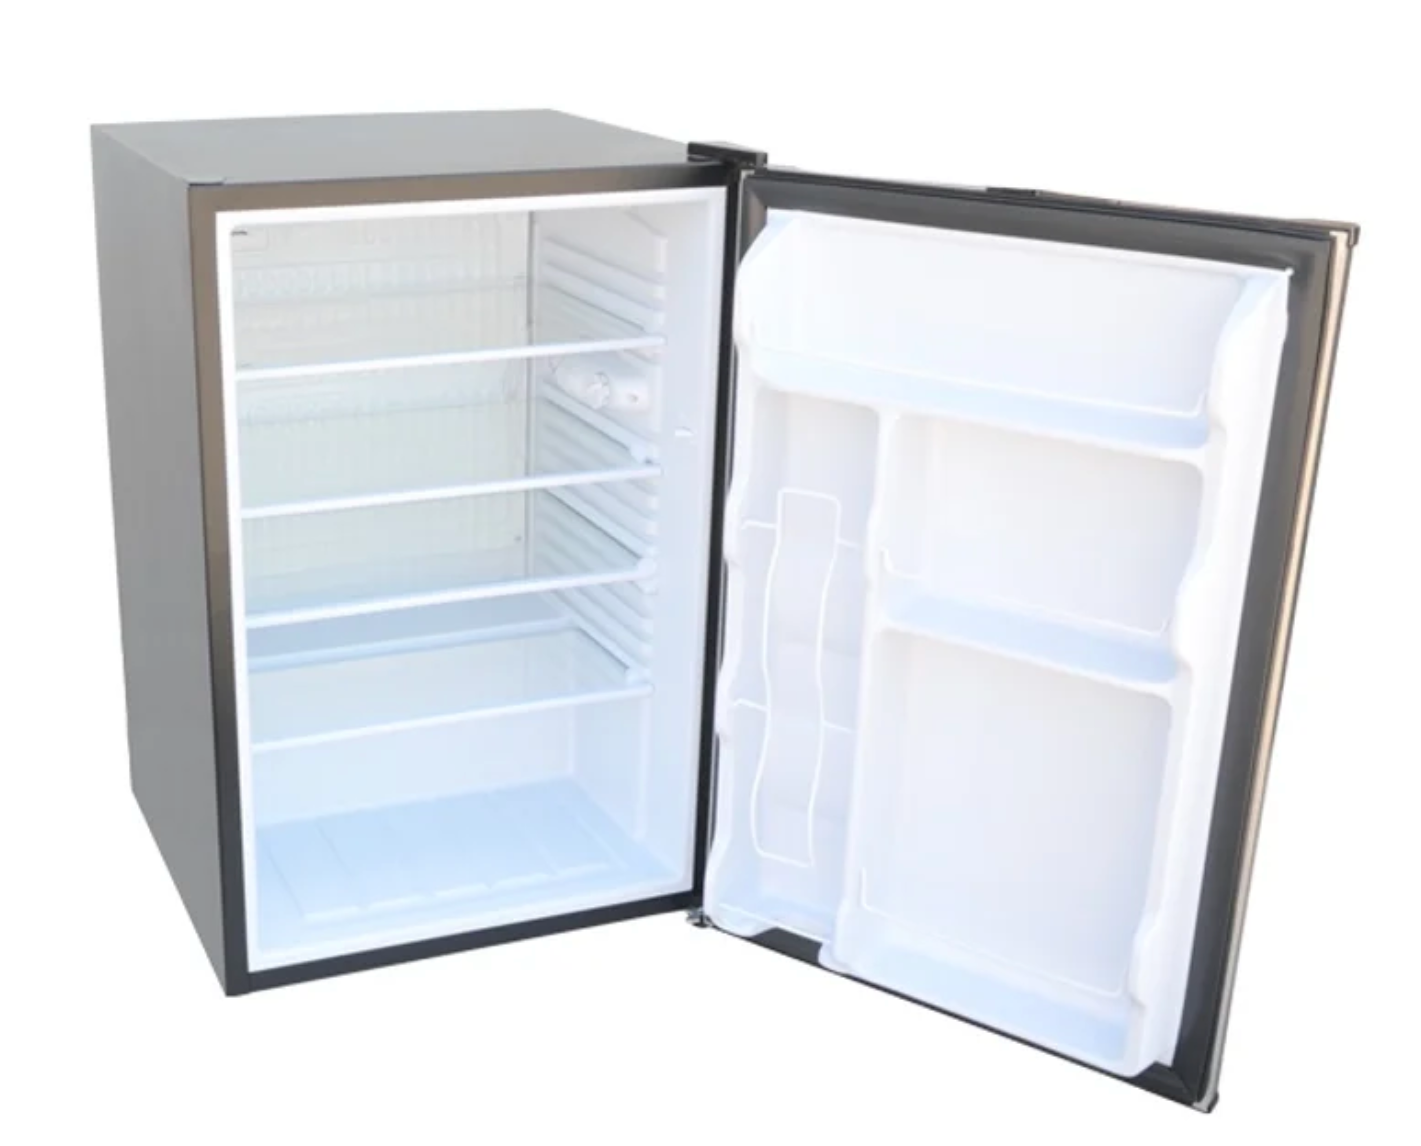 Built-In Outdoor Kitchen Refrigerator with Temp Control Soda Rack and Lights